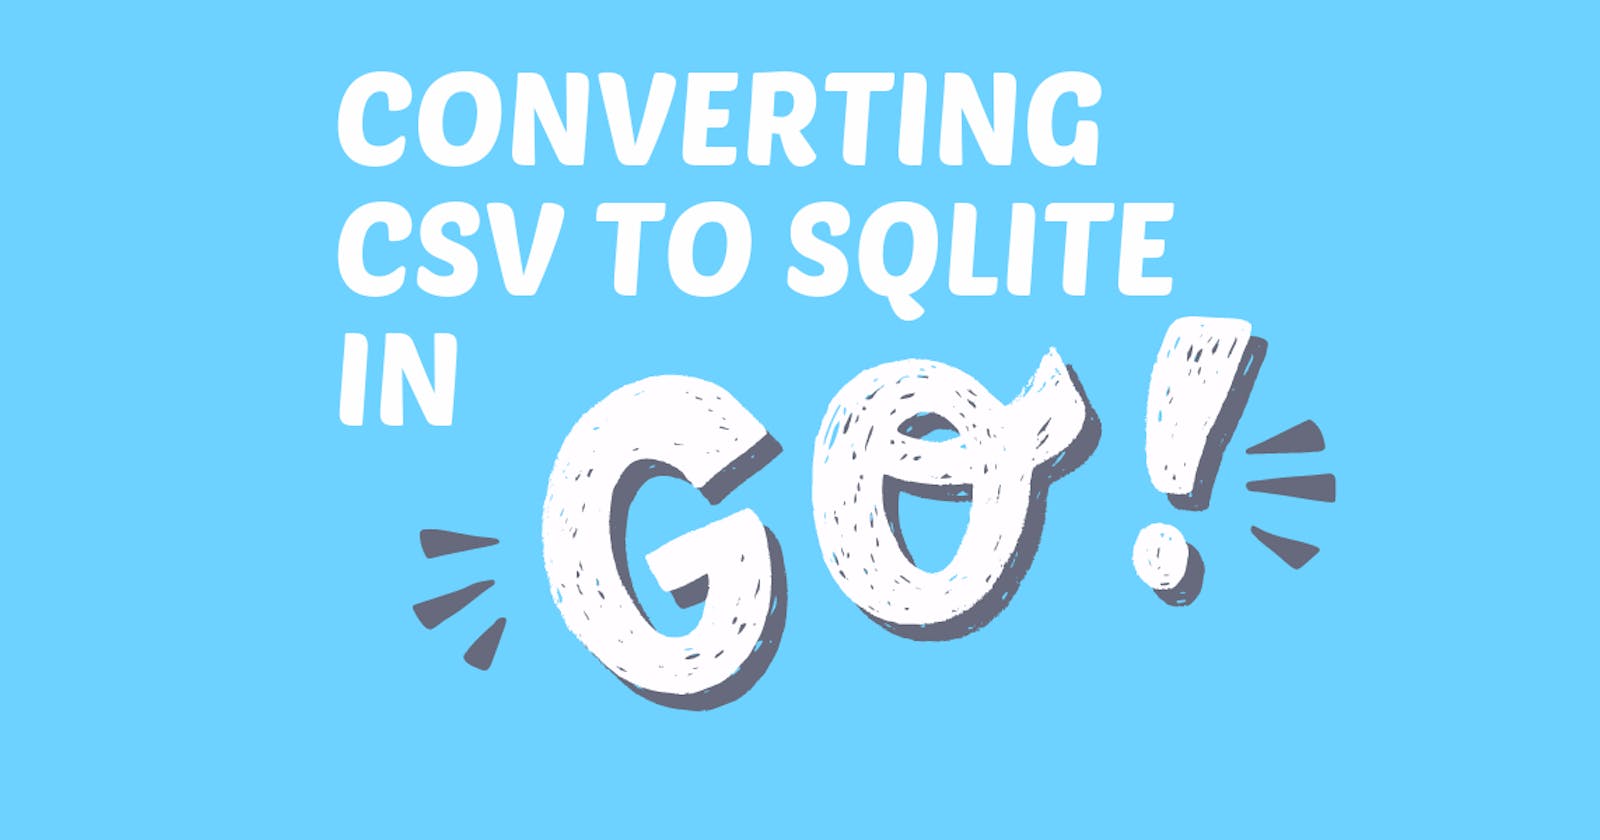 Converting csv data to sqlite in golang